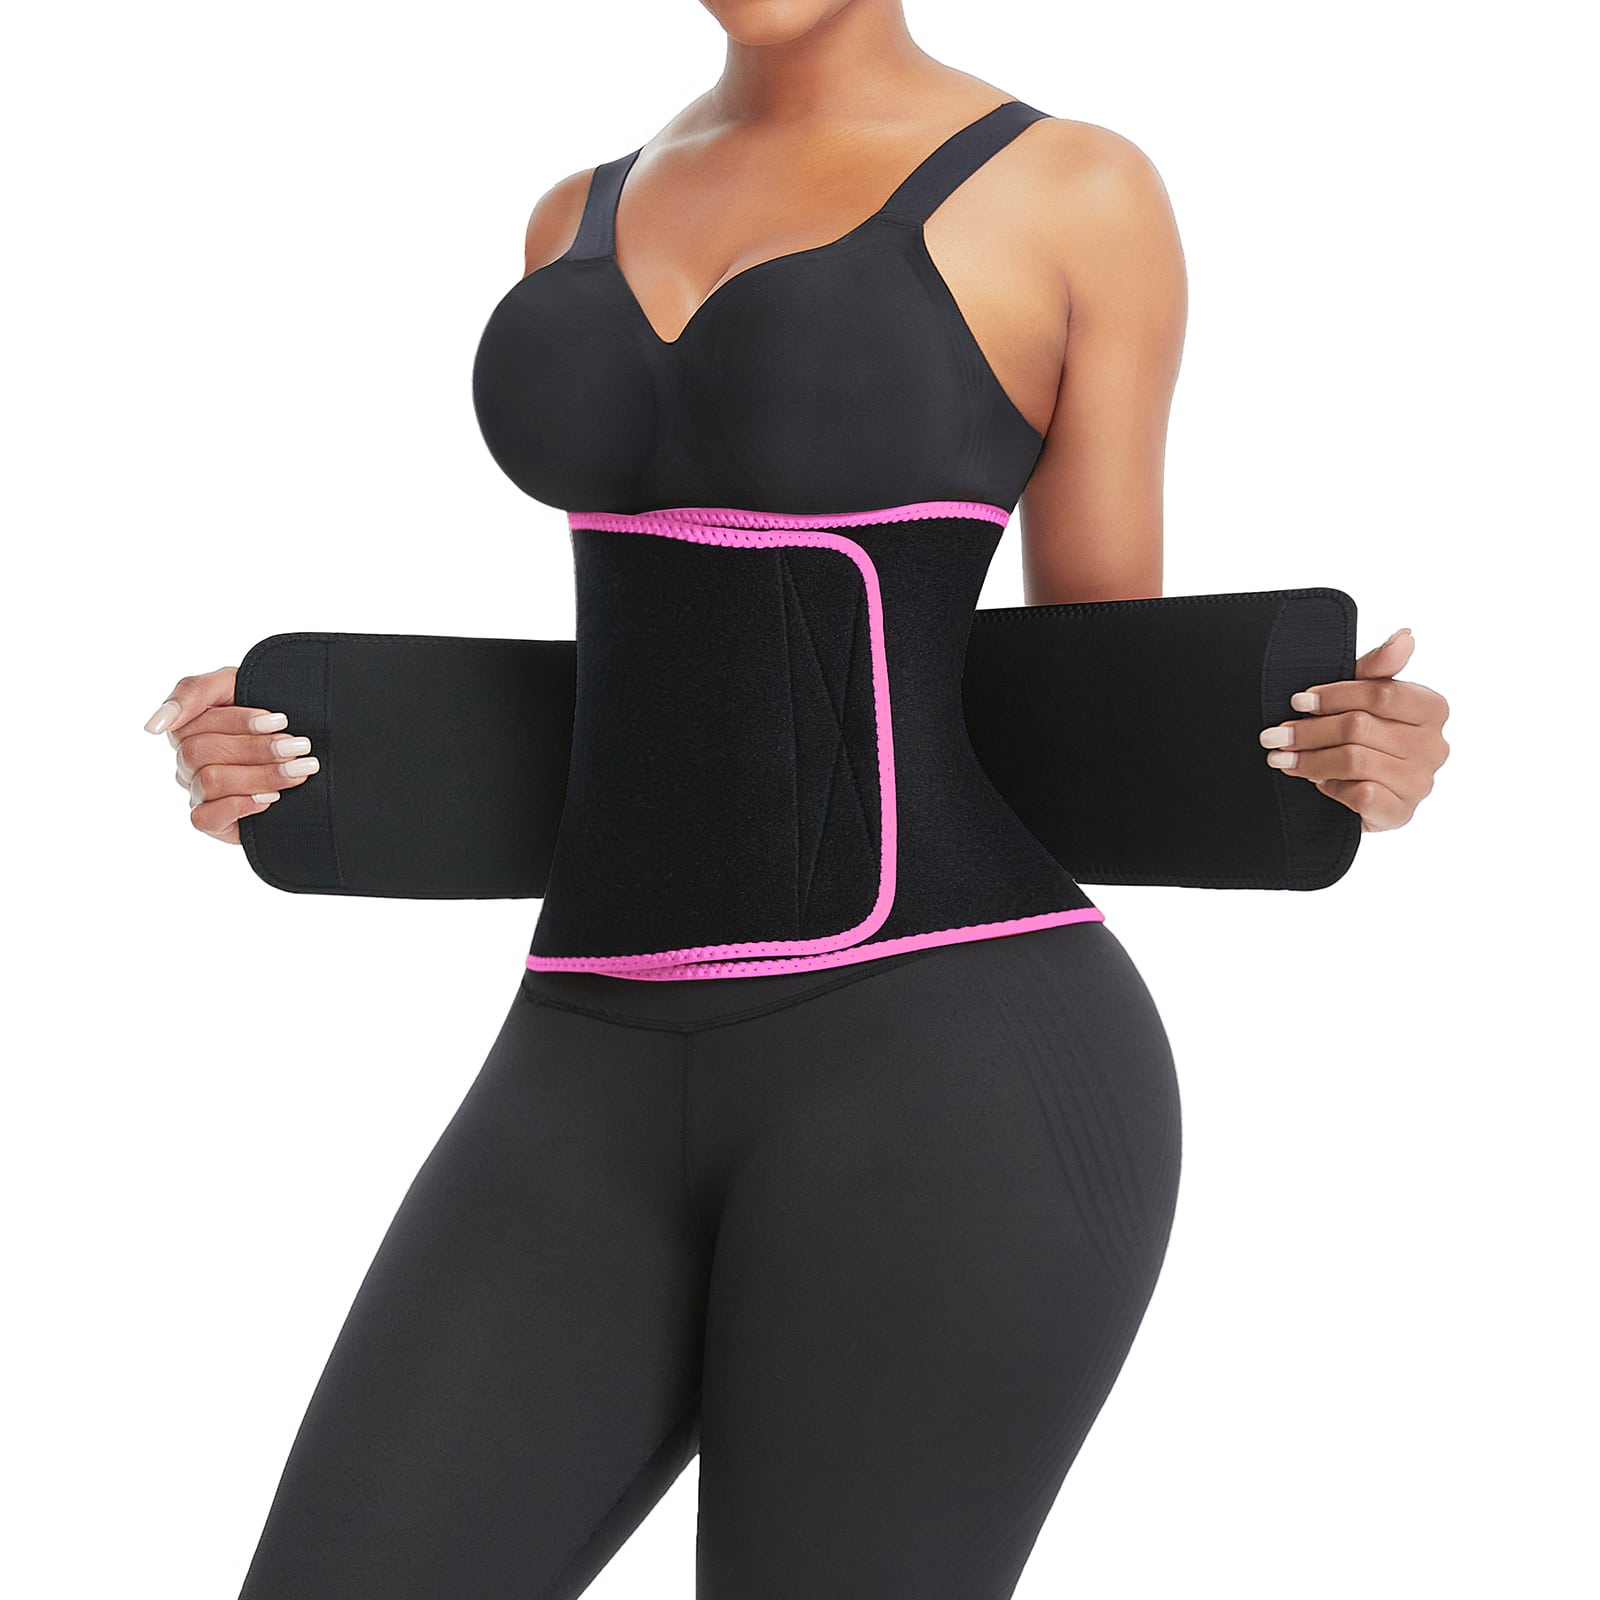 While Sleeping, is it Safe to Wear a Waist Trainer?